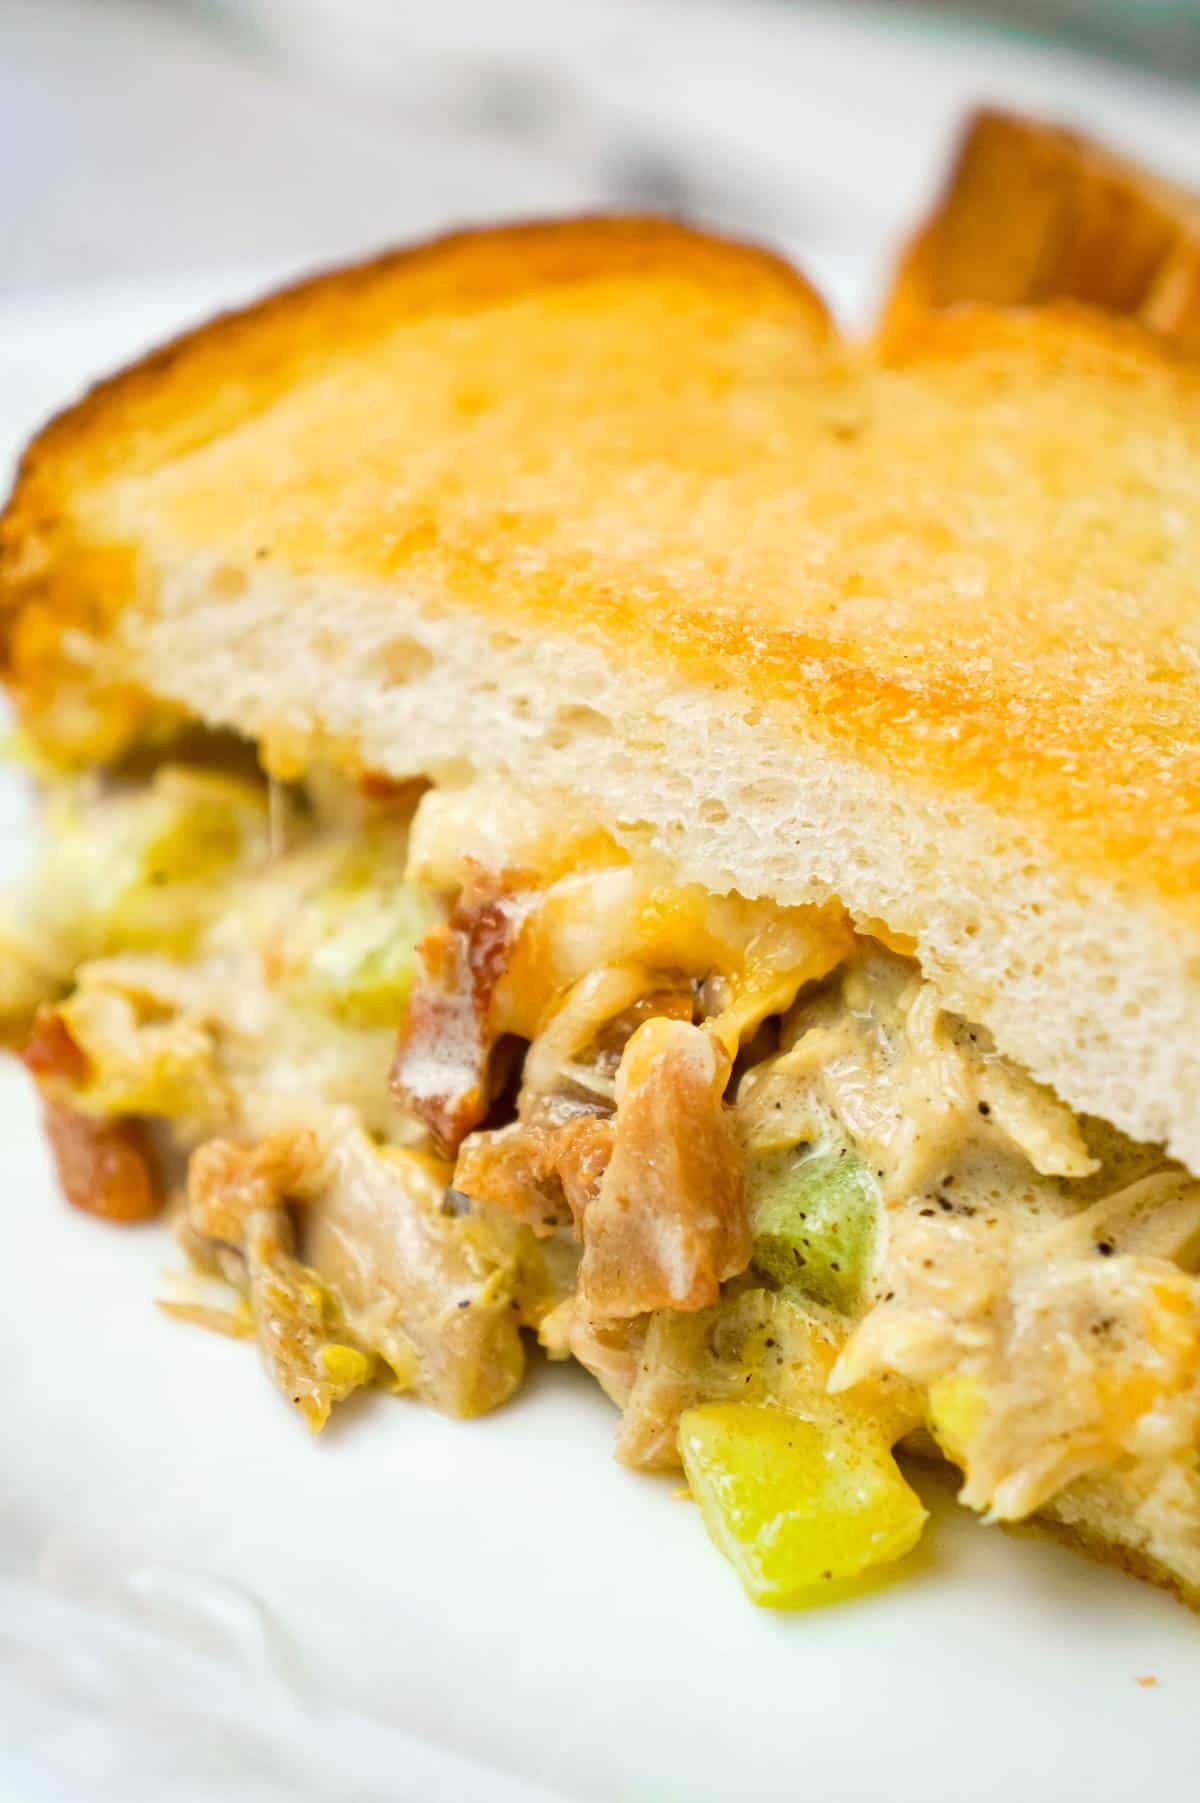 Dill Pickle Chicken Grilled Cheese Casserole is a delicious dinner recipe loaded with shredded chicken, diced dill pickles, crumbled bacon, ranch dressing and cheese all in between layers of toasted bread.